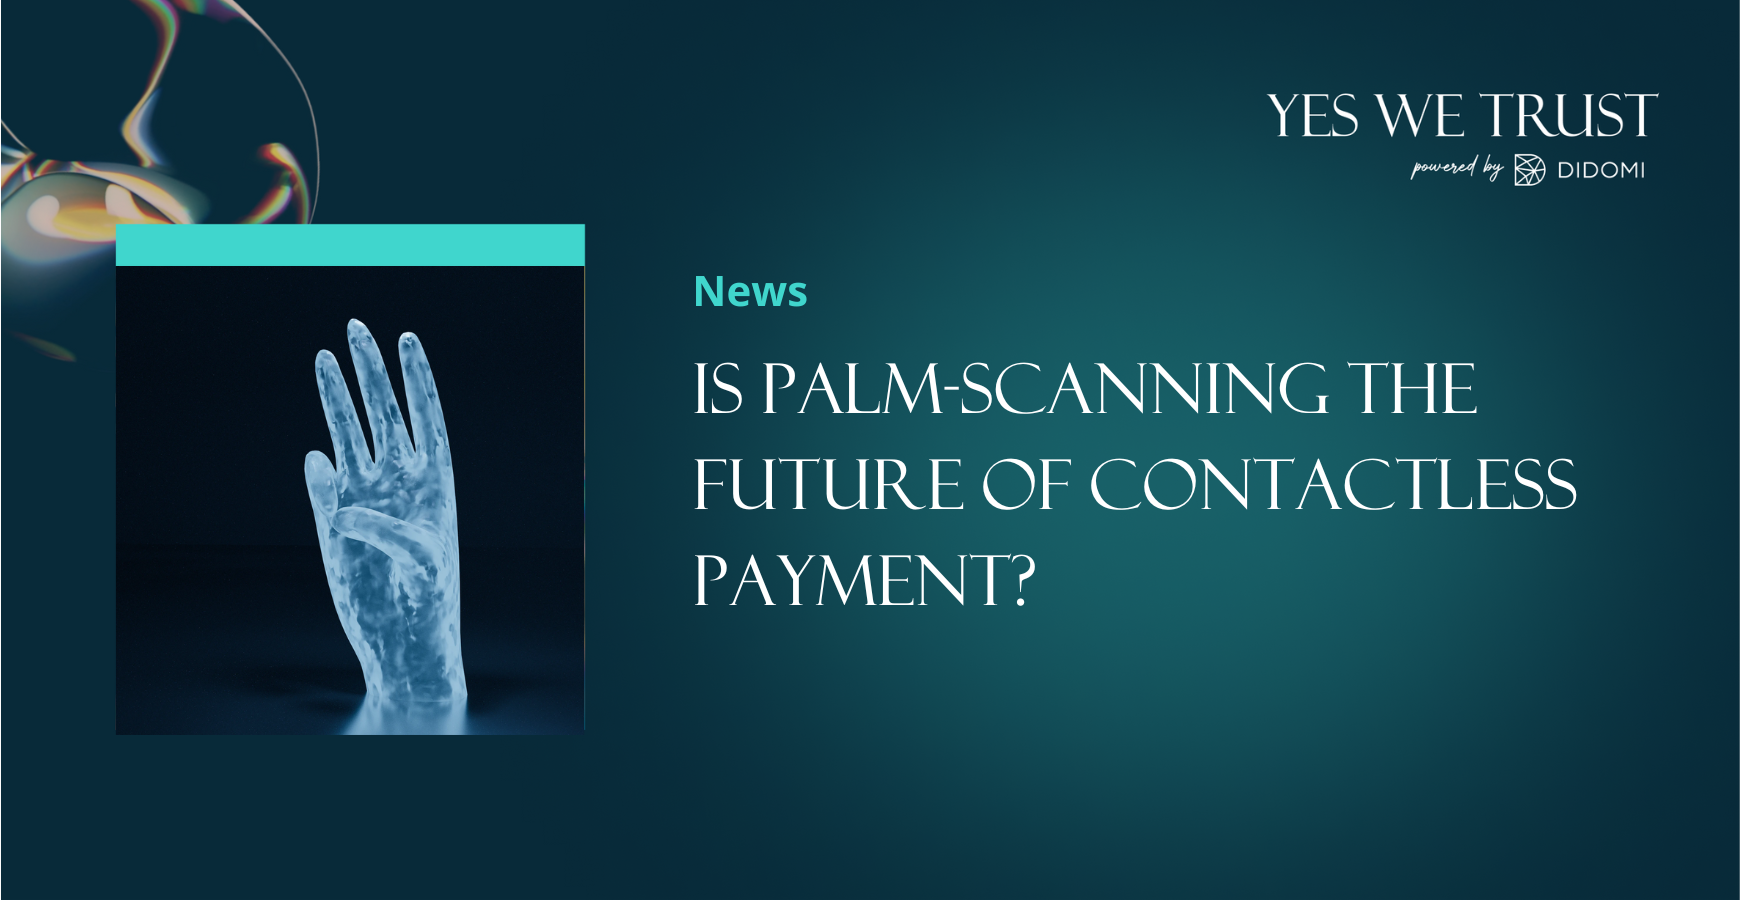 Is palm-scanning the future of contactless payment?